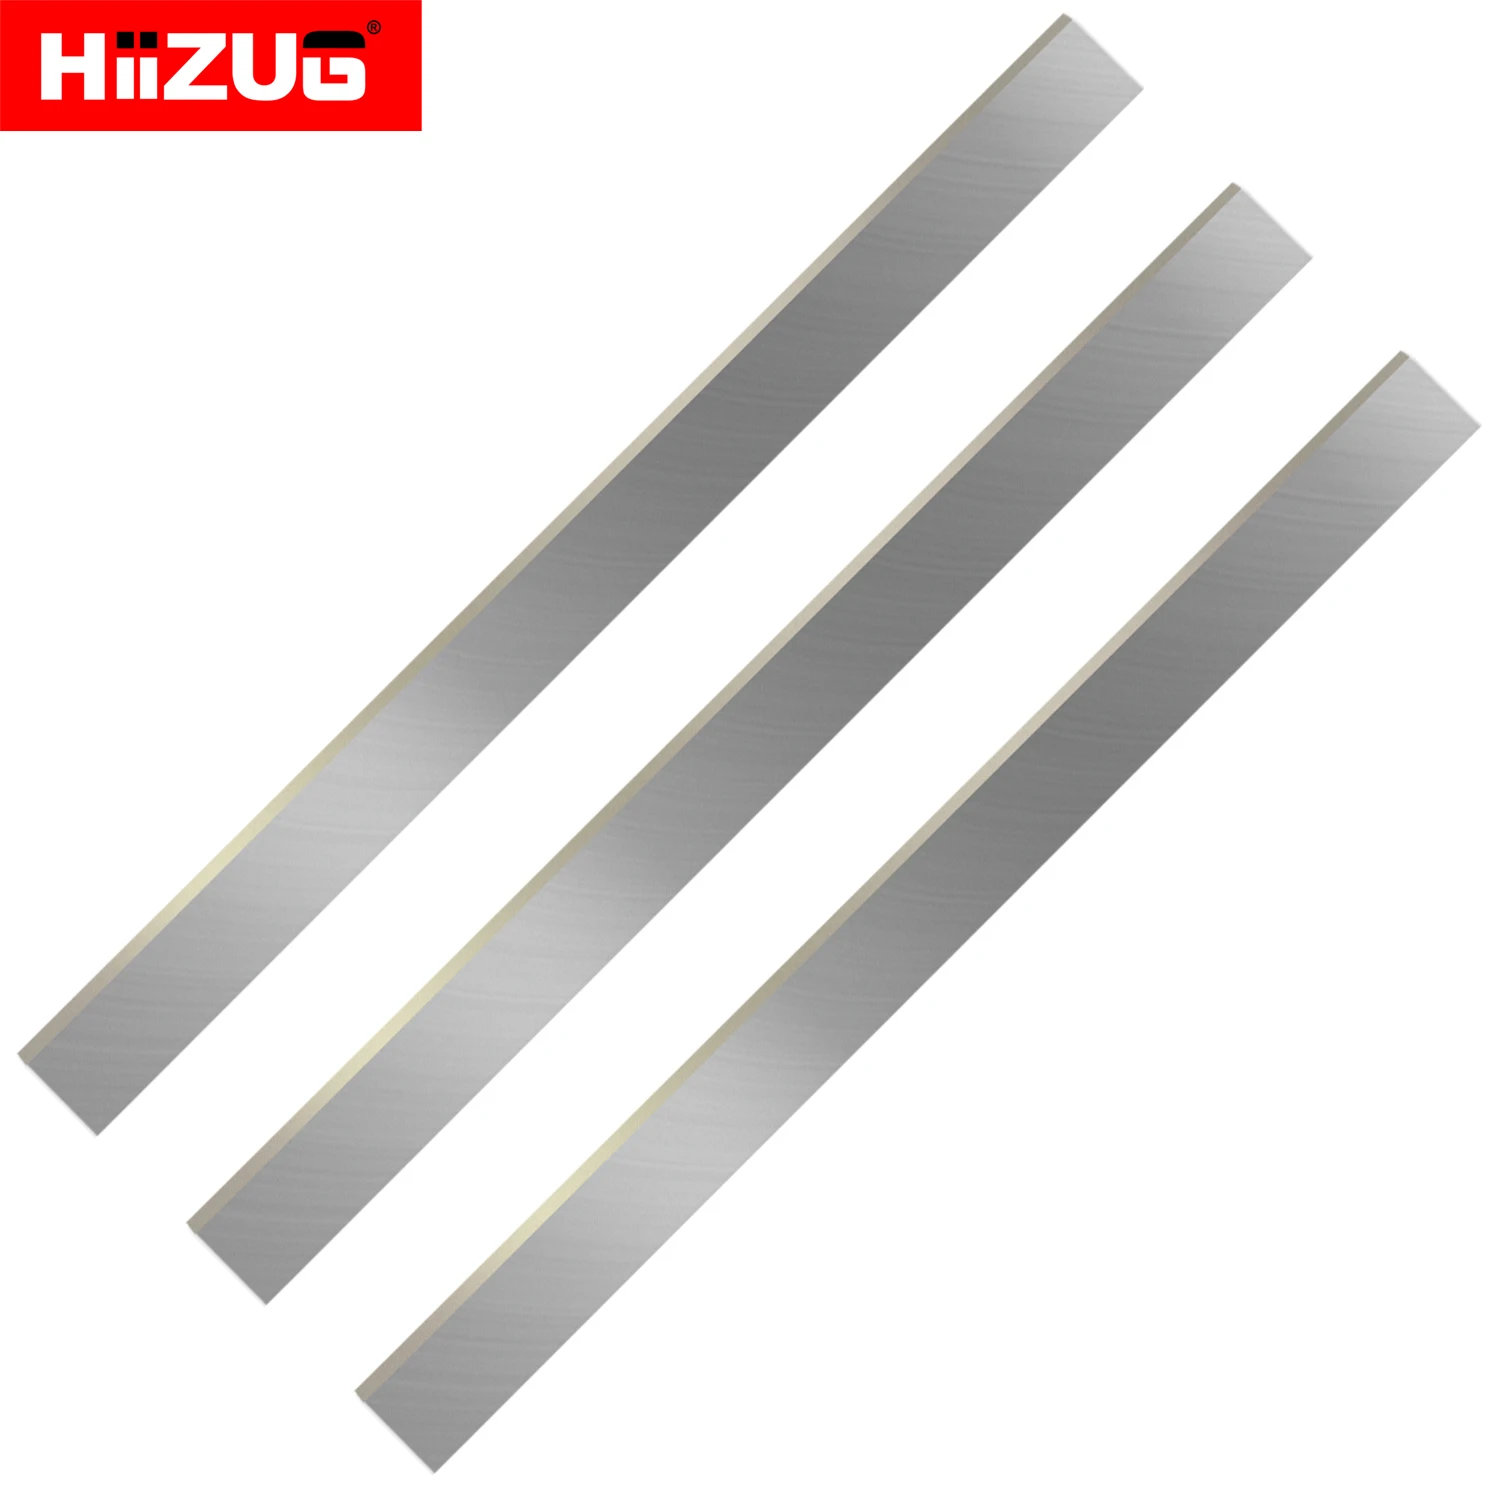 460×25×3mm Planer Blades Knives for Woodworking Electric Planer Thicknesser Jointer Cutter Heads Set of 3